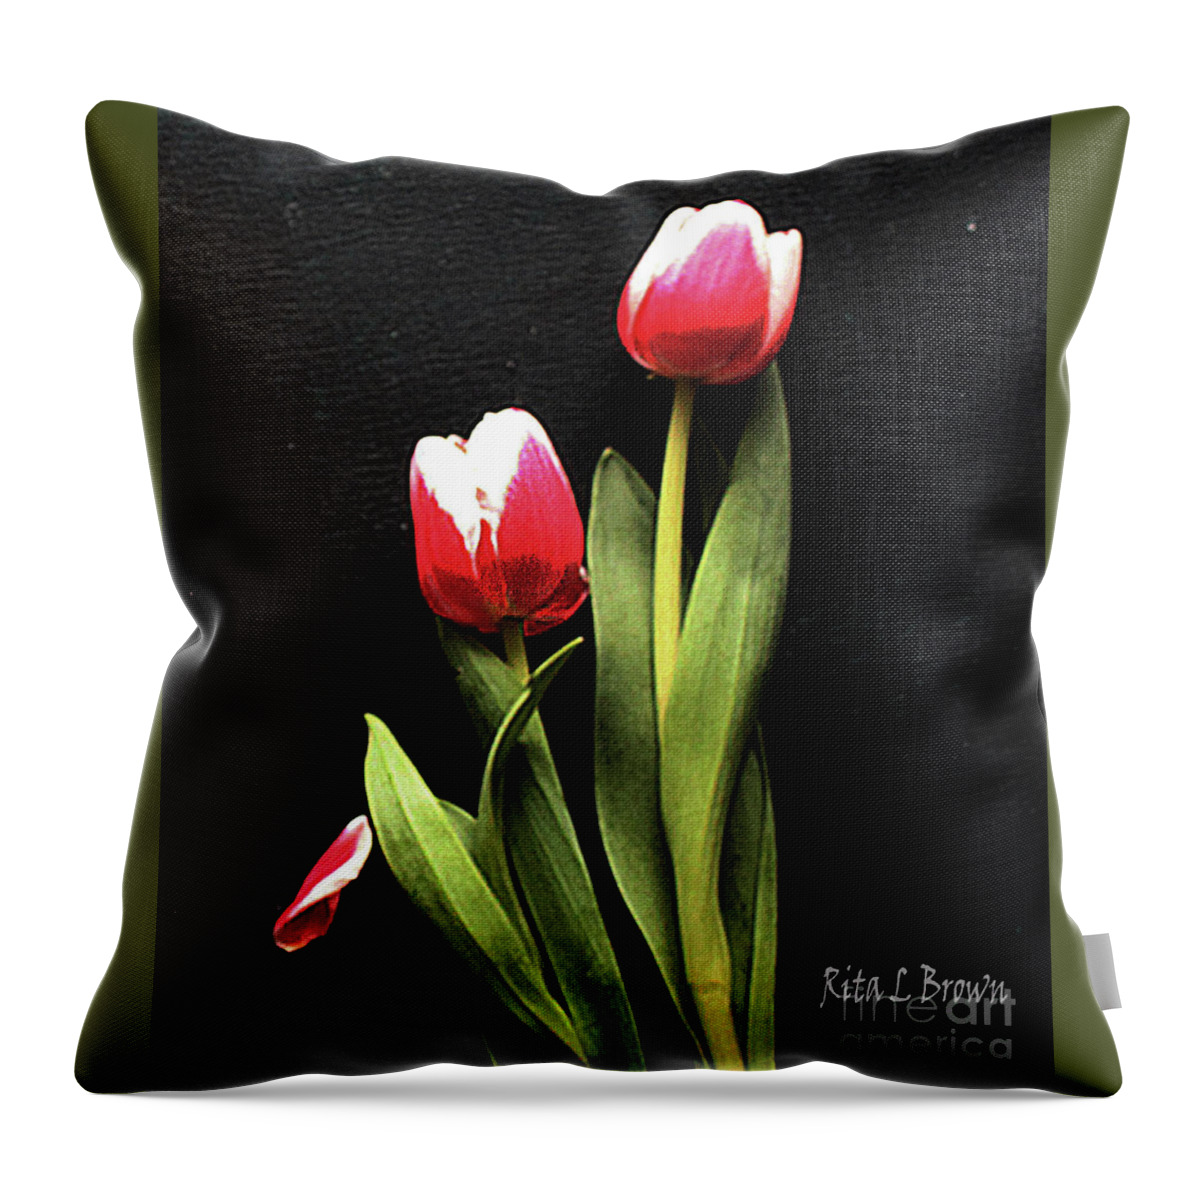 Tullips Throw Pillow featuring the photograph Pink and White Tullips by Rita Brown